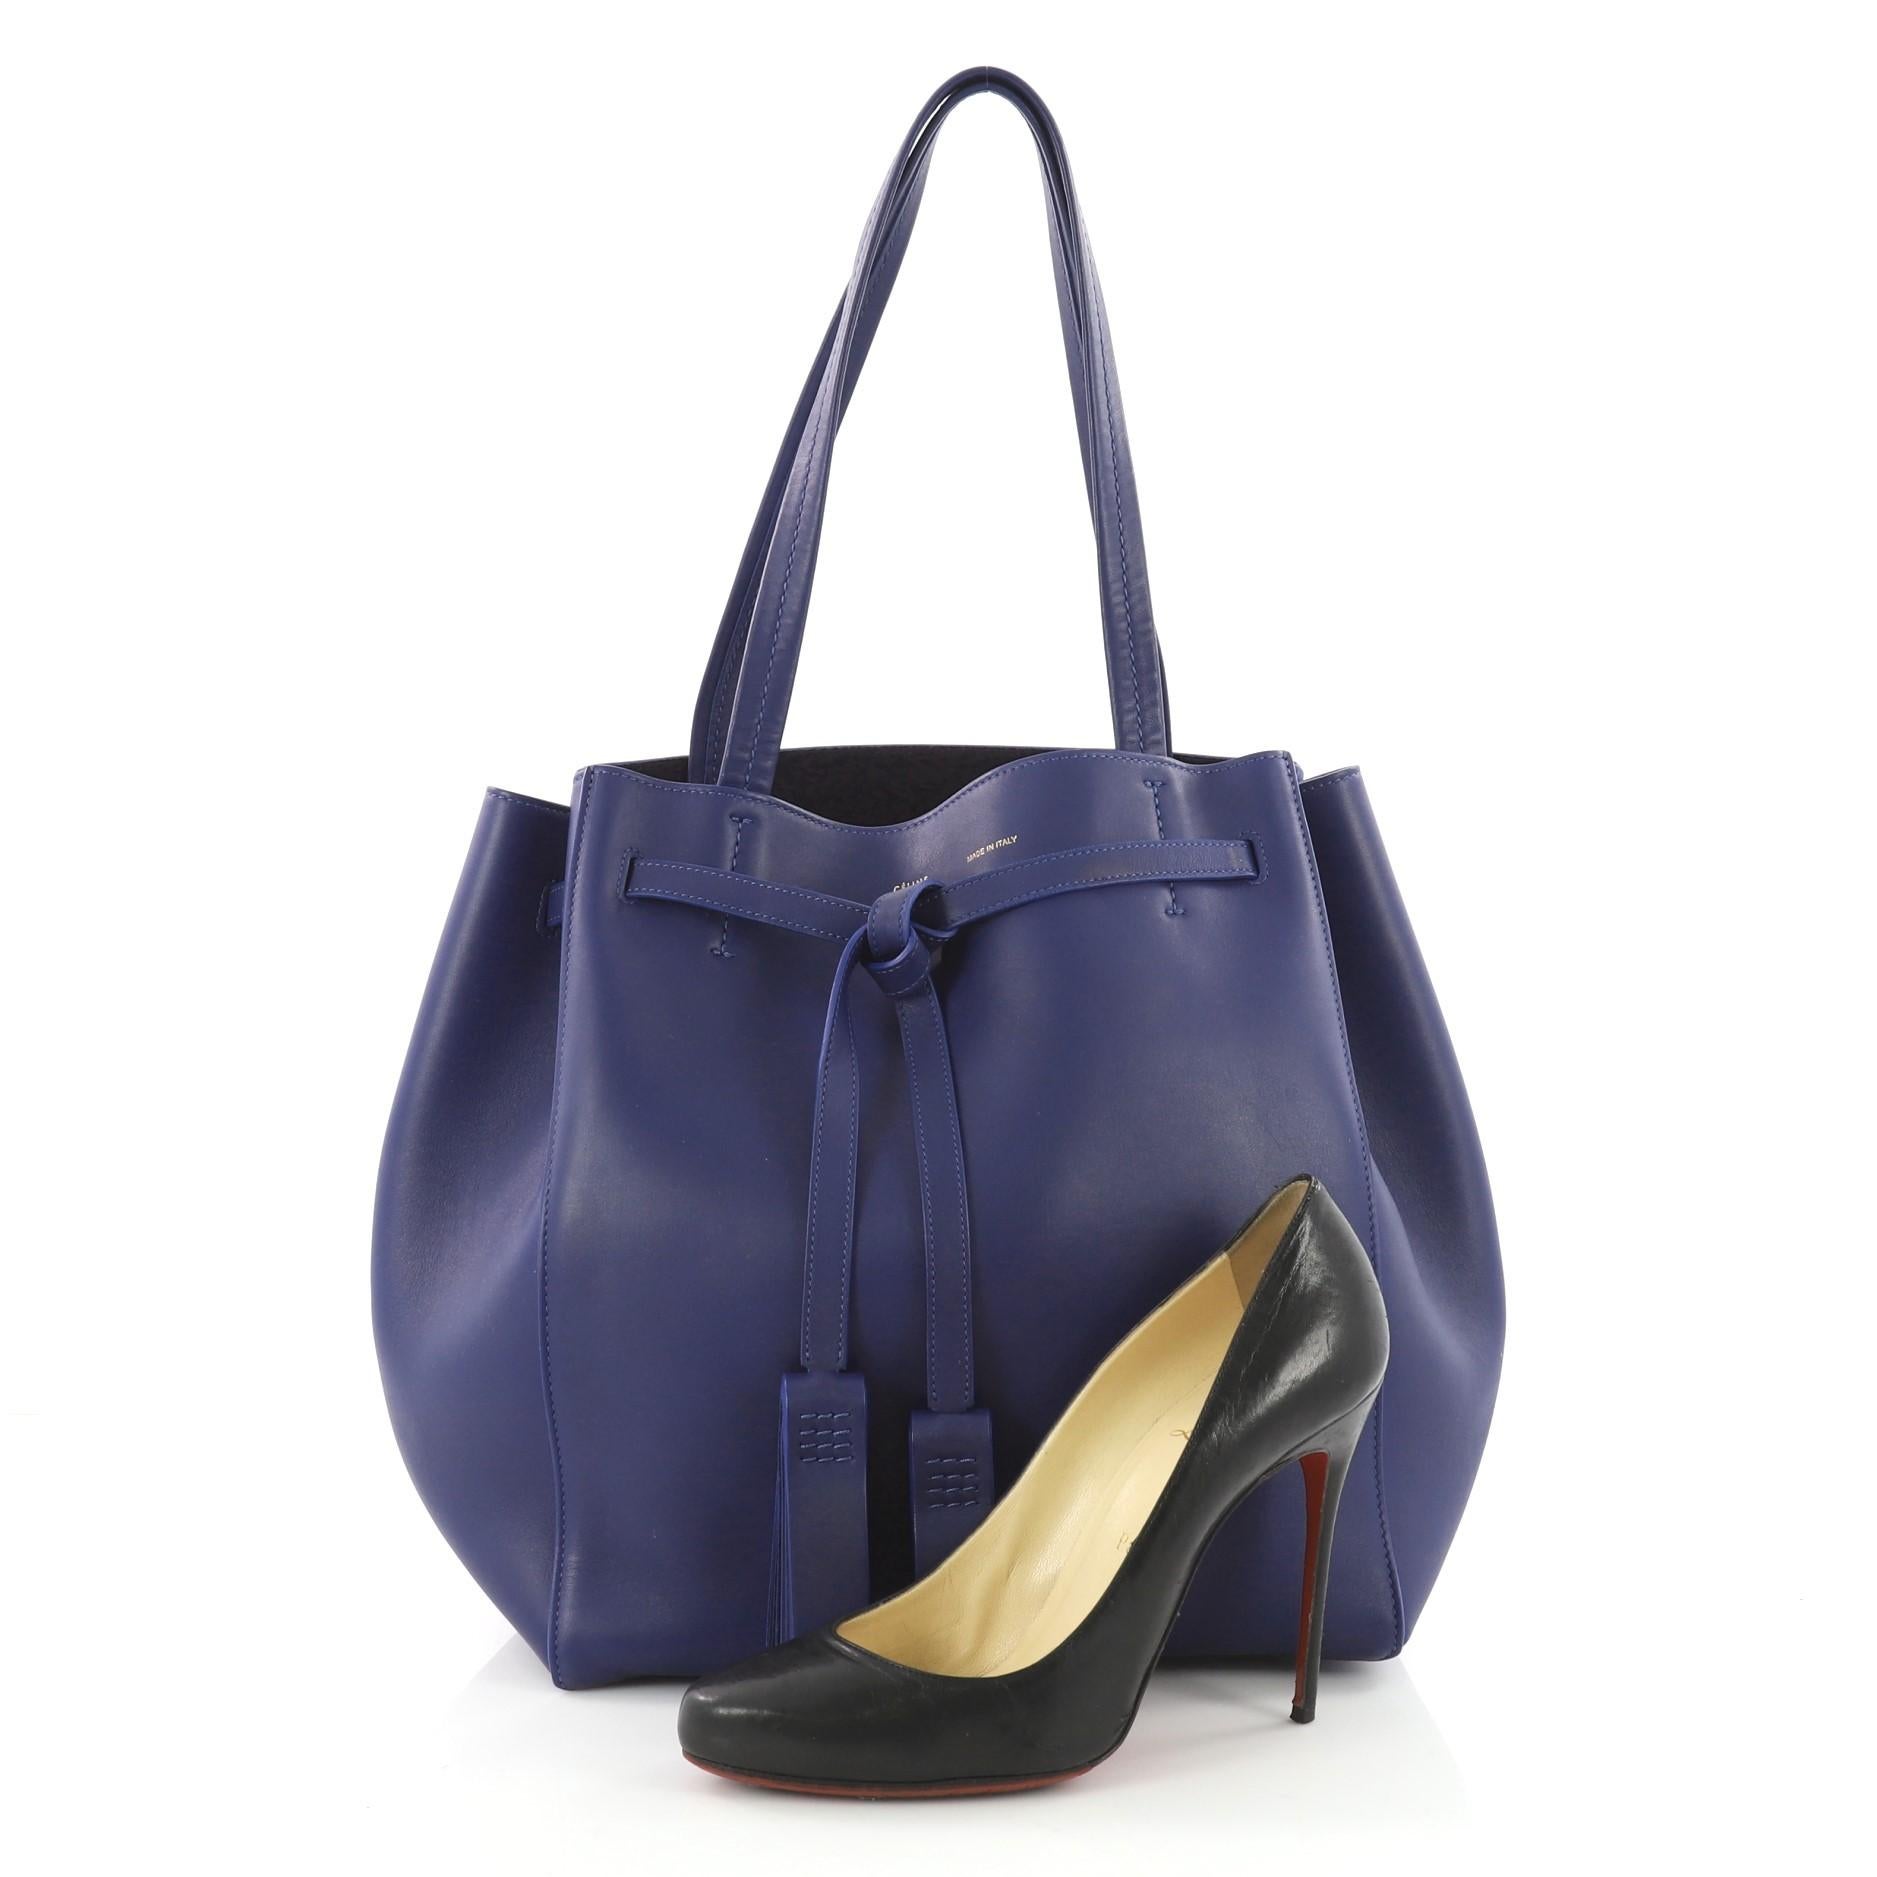 This authentic Celine Phantom Tie Cabas Tassel Tote Leather Small is a fashionista's go-to stylish essential. Crafted from blue leather, this minimalist city tote features dual flat tall handles, stamped Celine logo, and gold-tone hardware accents.